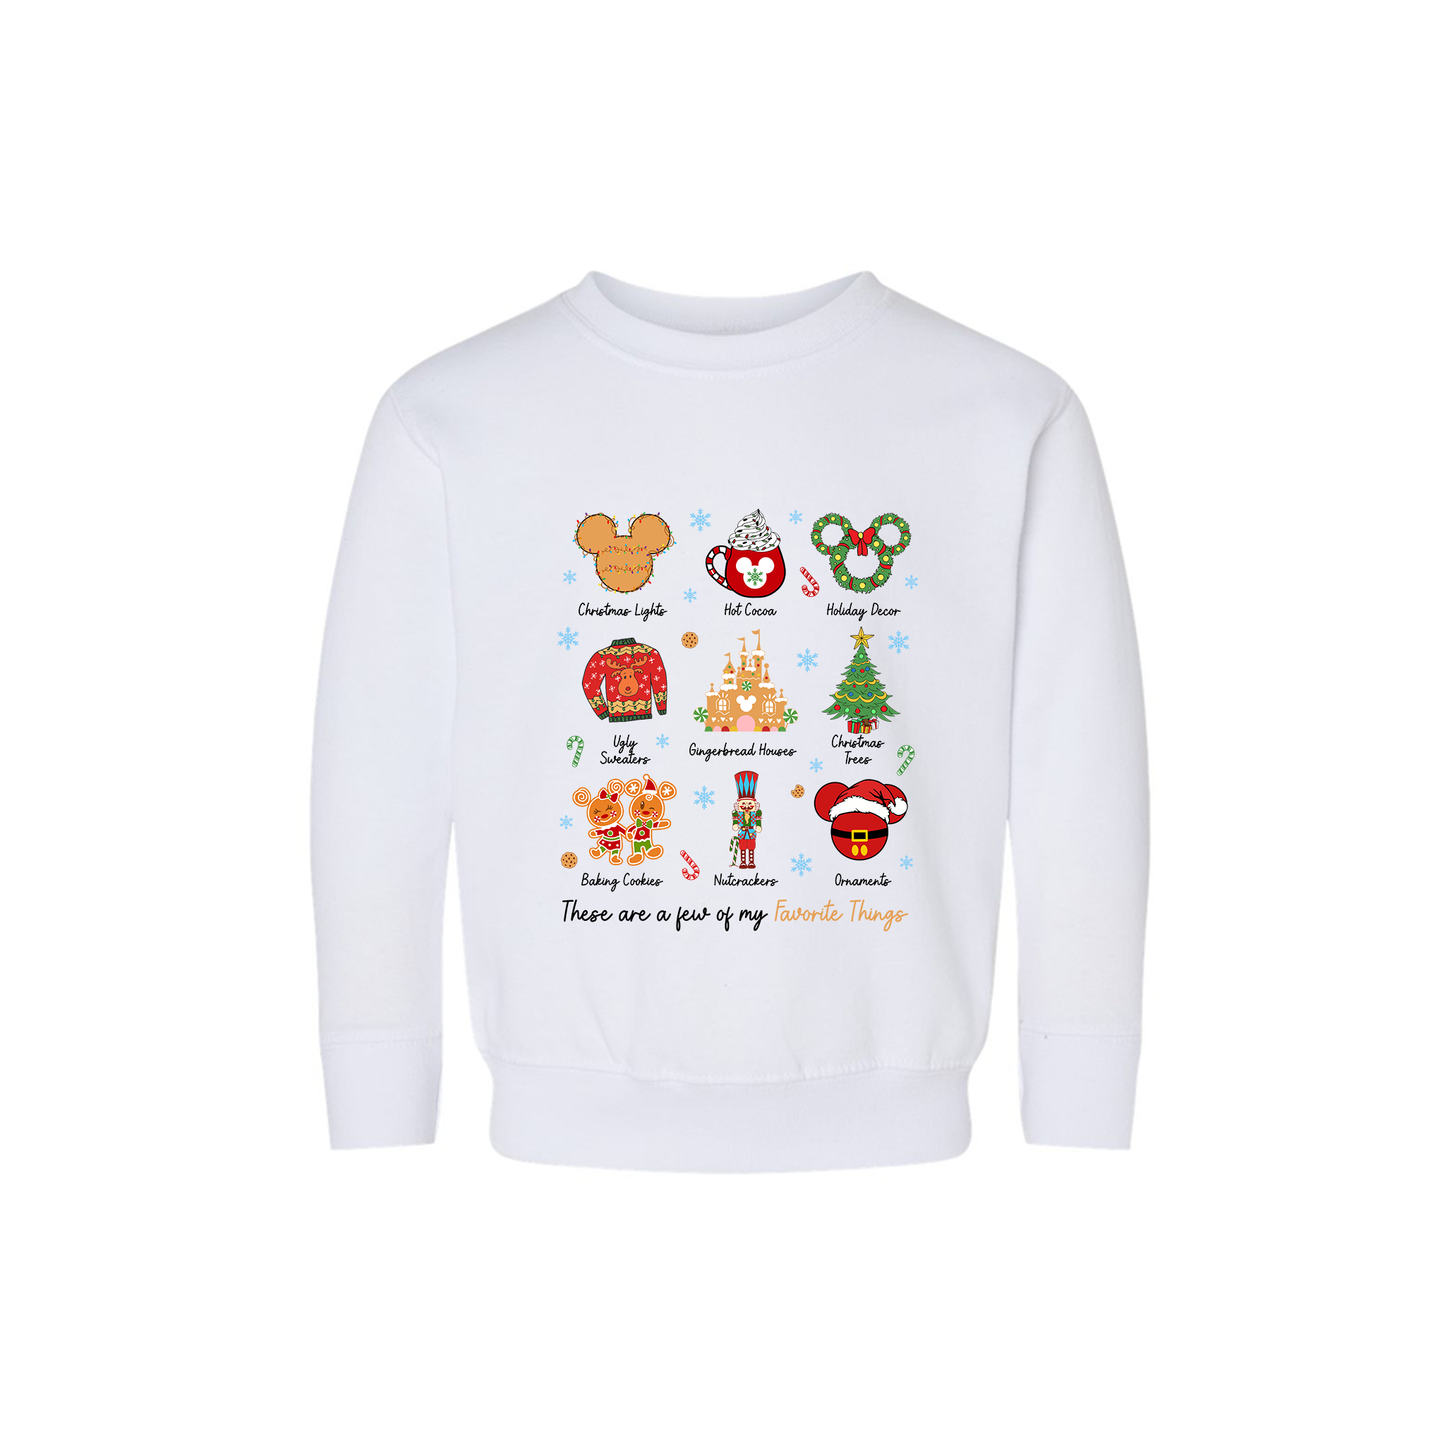 These Are A Few of My Favorite Things (Christmas Magic Mouse) - Kids Sweatshirt (White)